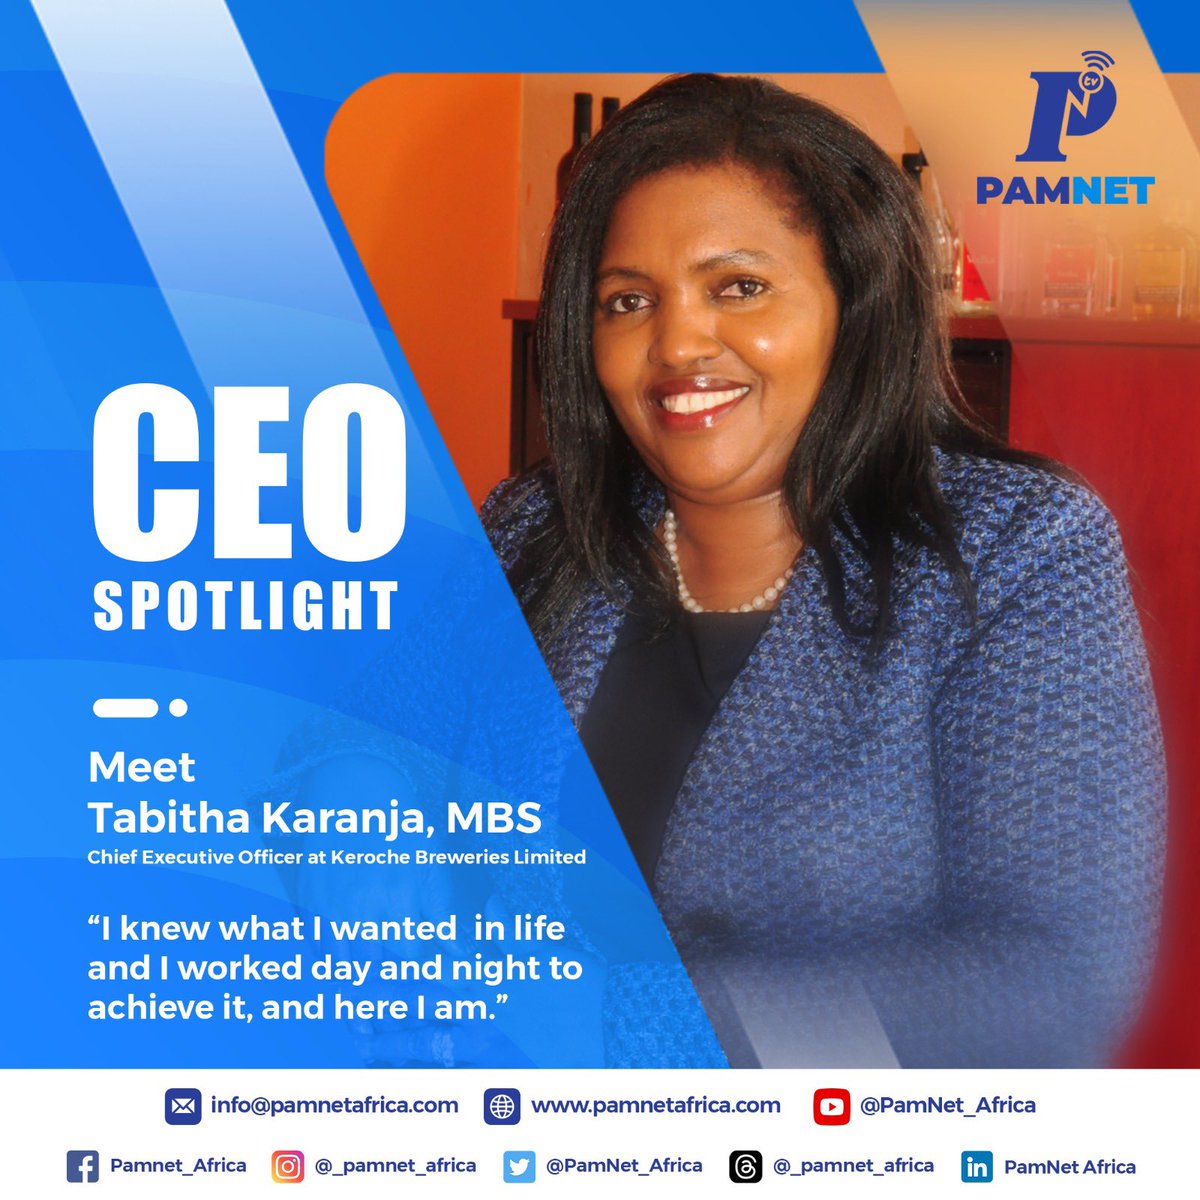 Meet Tabitha Karanja: a true inspiration in the business world. From a small village in Naivasha to the helm of Keroche Breweries, her journey embodies resilience, determination, and unwavering belief. #WomenEmpowerment #womenceo